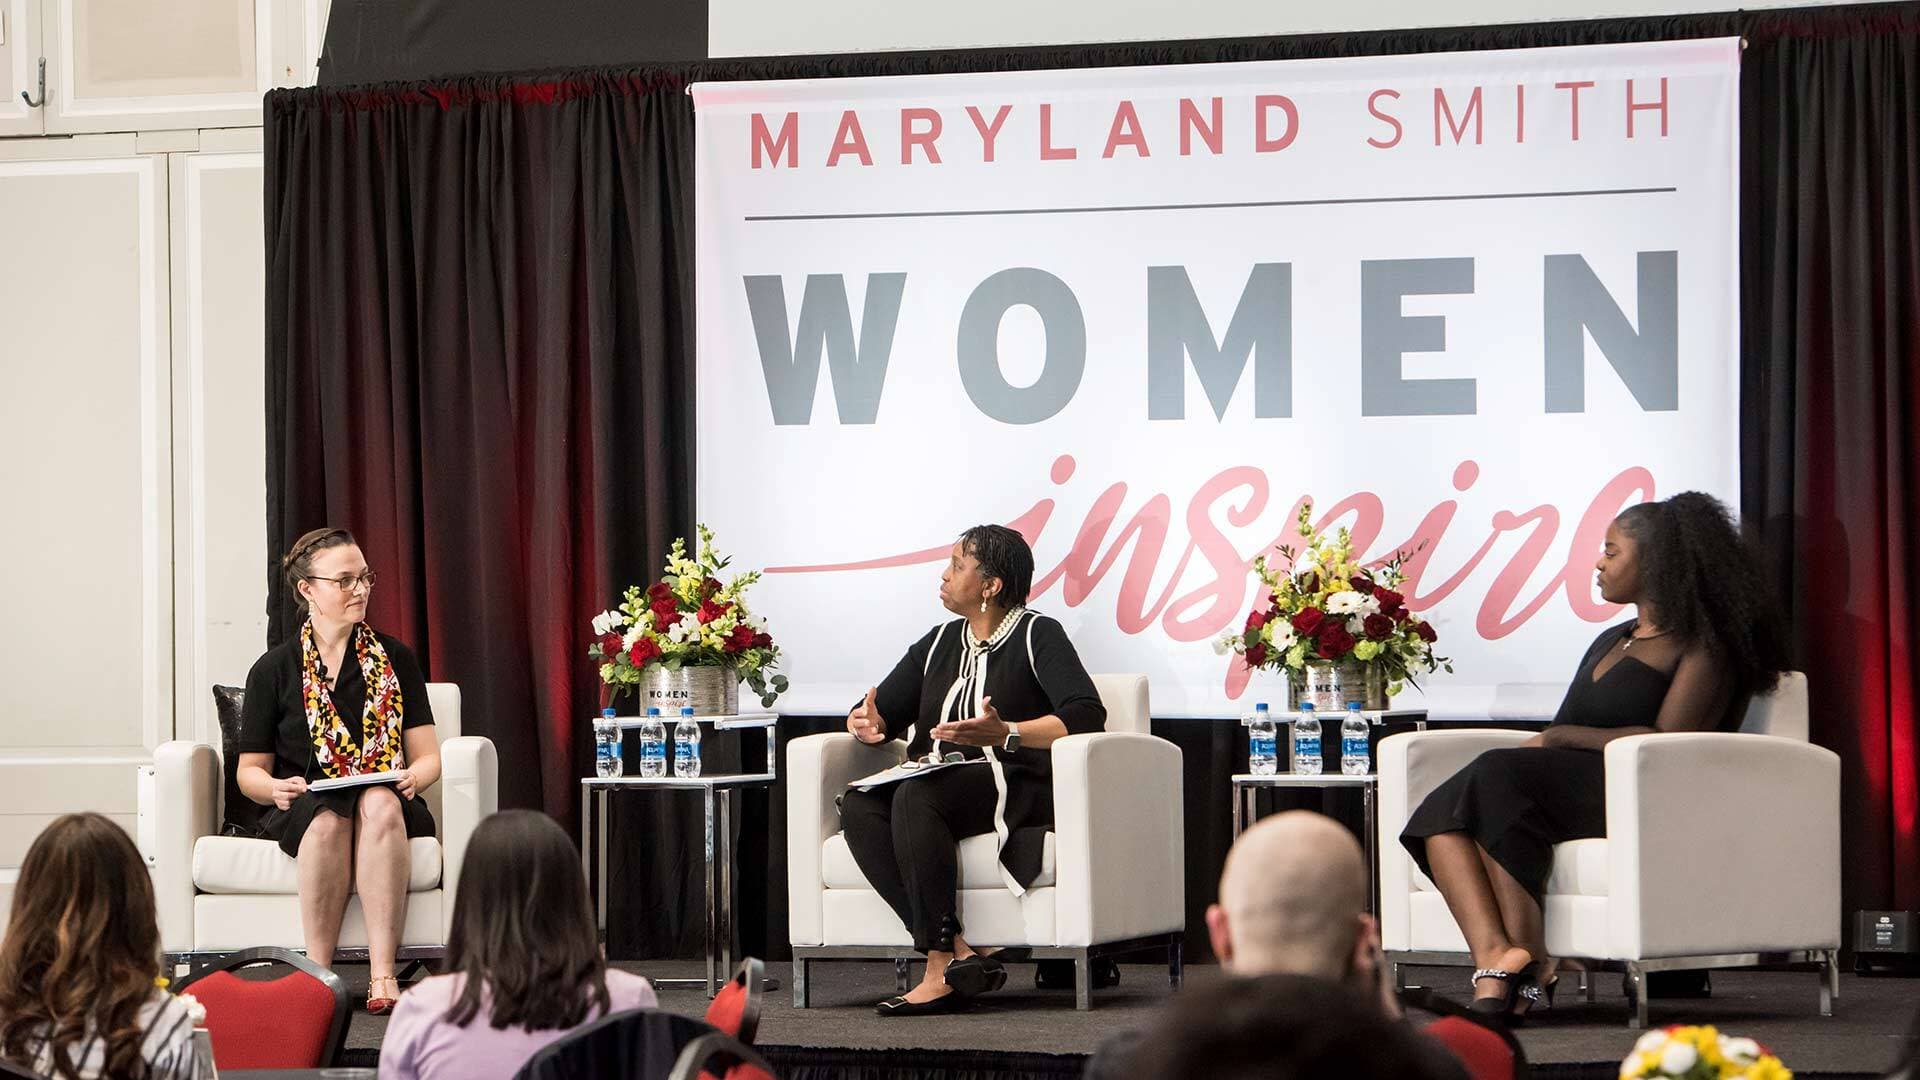 Nicole Coomber, Margo Thomas M.S. '90 and L. Audrey Awasom '18 on stage at the Maryland Smith Women Inspire event